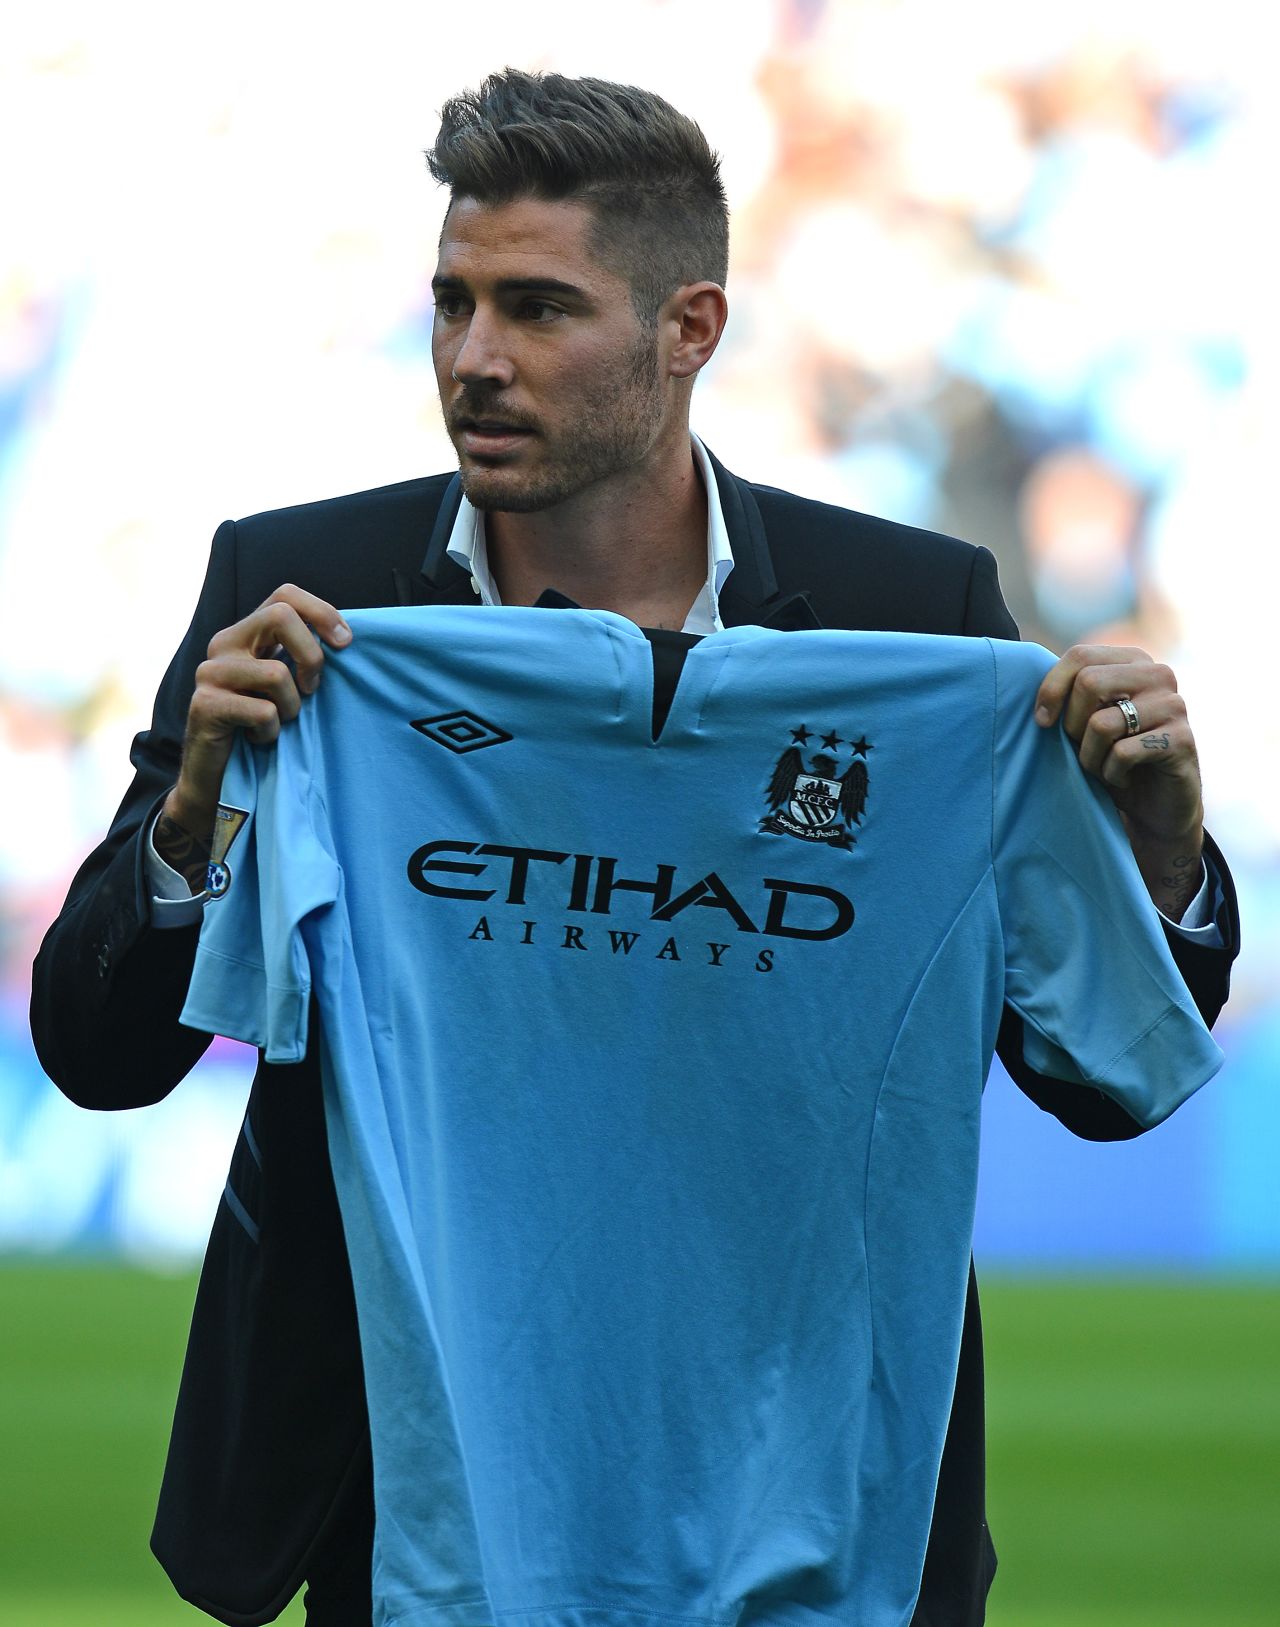 Manchester City was the highest spender when it came to agents' fees, paying out close to $17million. Manager Roberto Mancini was busy in the transfer market, bringing in the likes of Javi Garcia from Benfica.